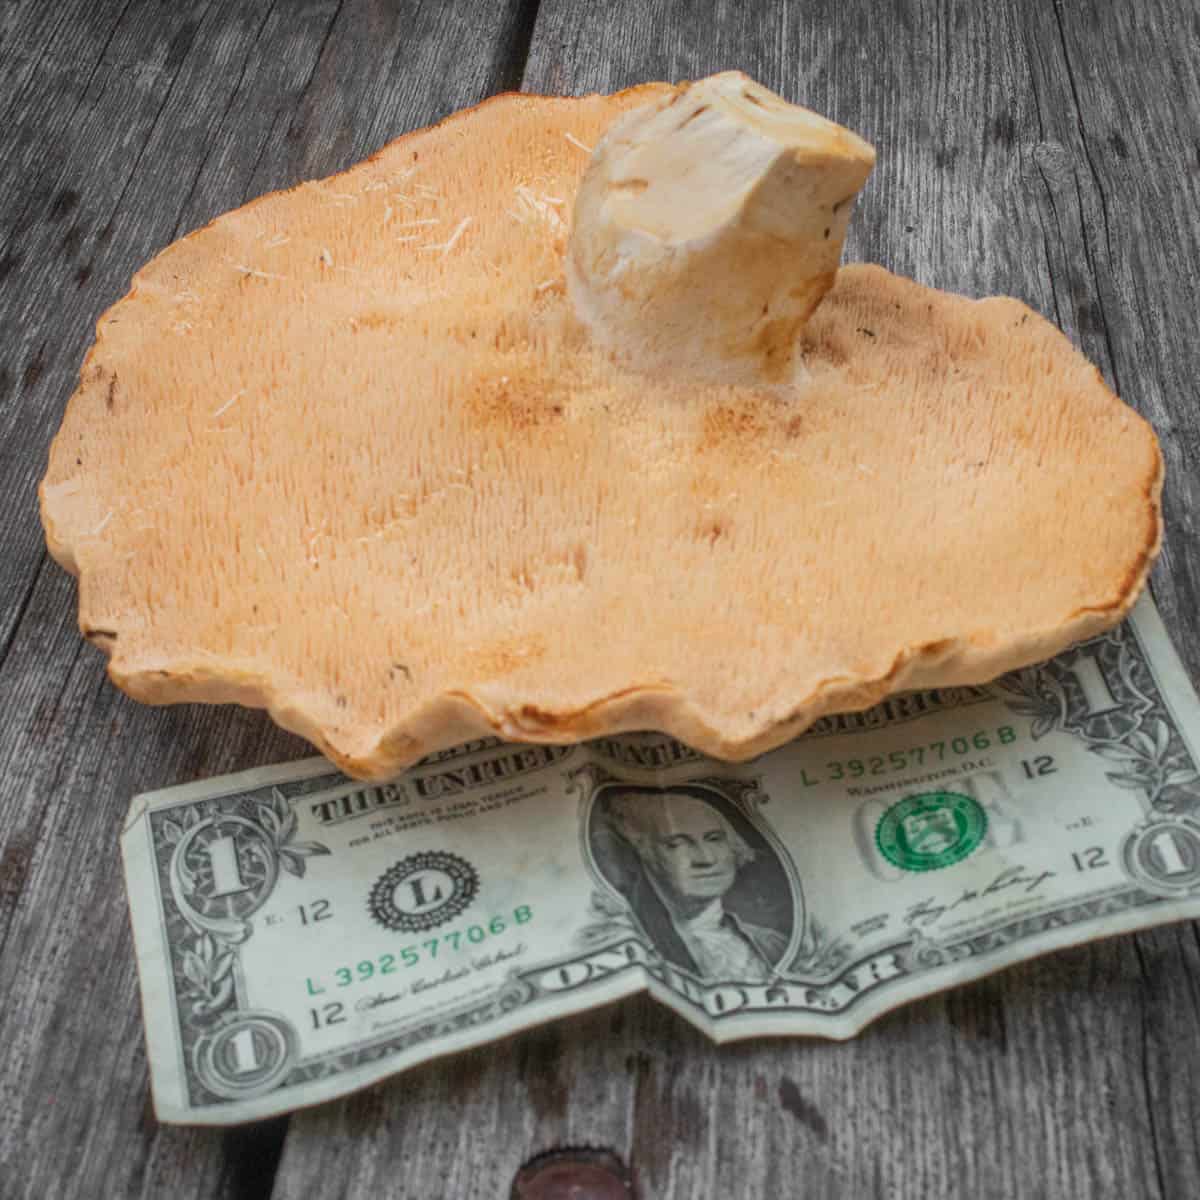 very large mushroom next to a dollar for scale 